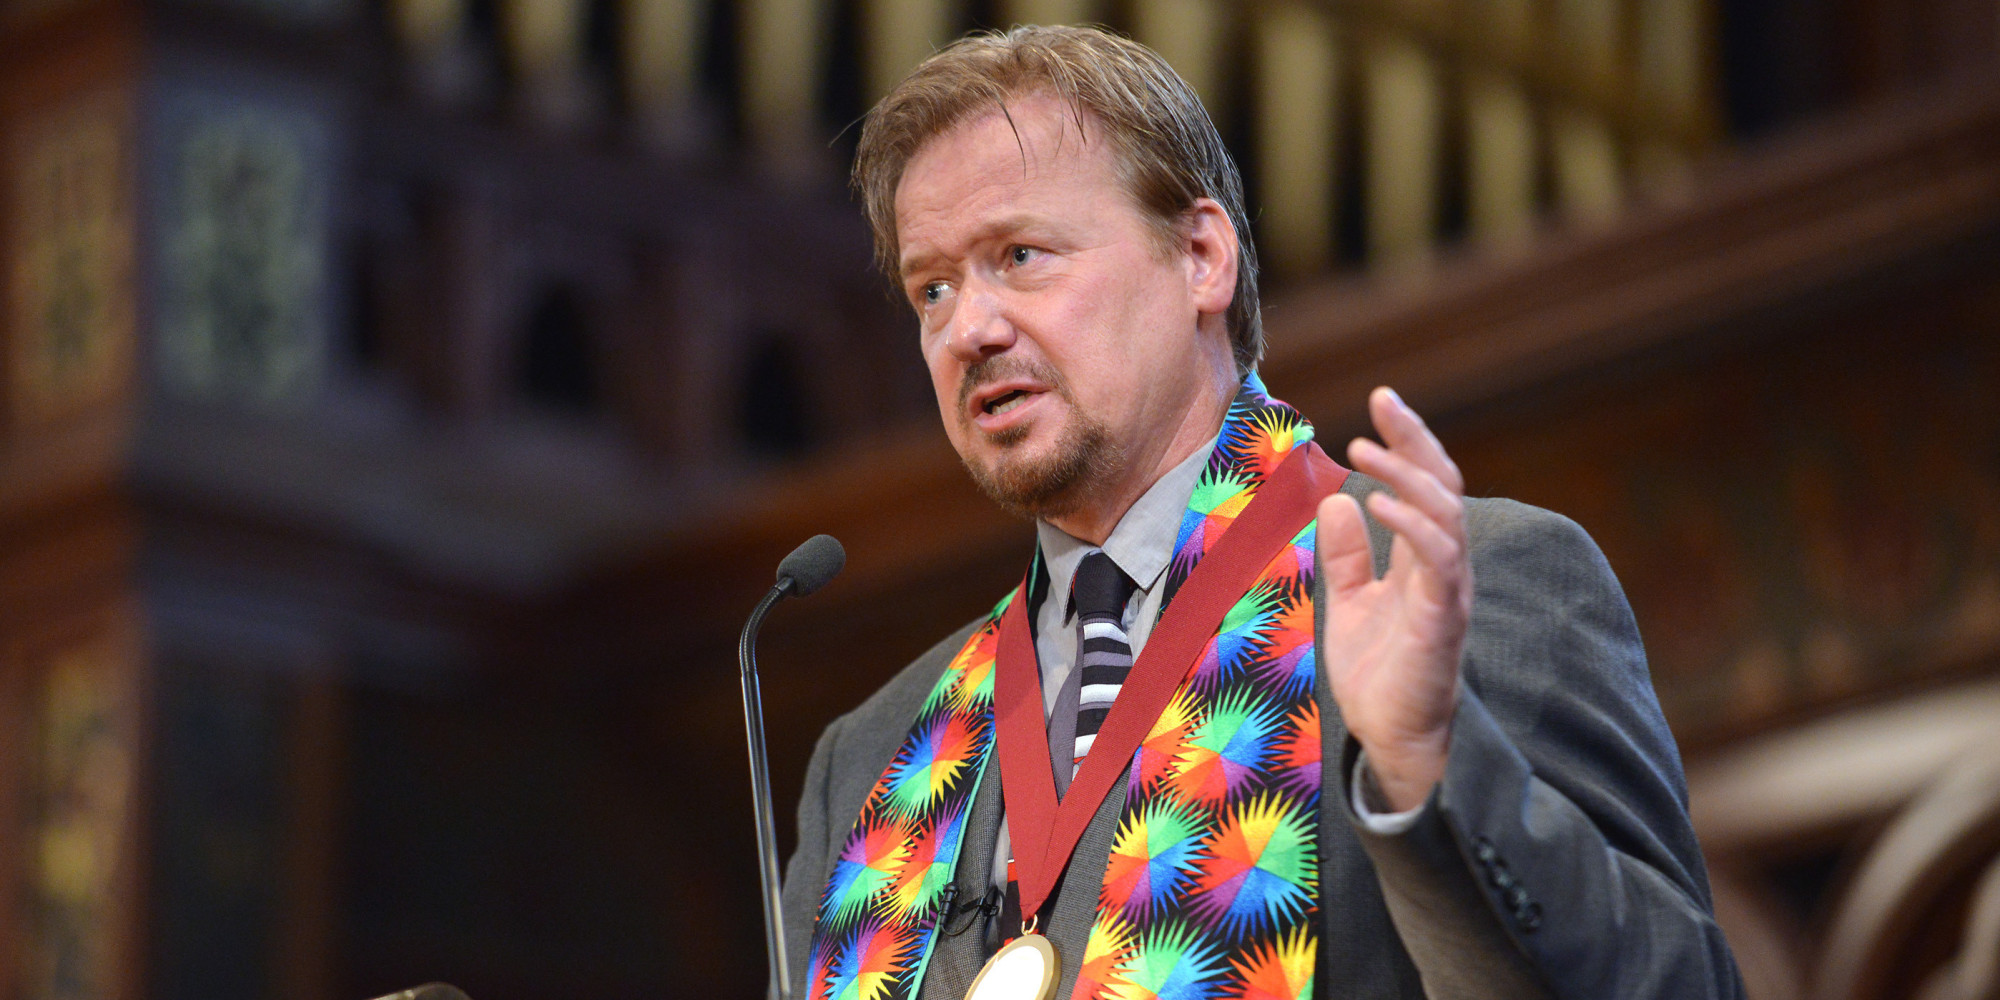 Frank Schaefer speaks to parishioners after receiving an Open Door Award for his public advocacy during a ceremony marking 10 years of legal gay marriage in Massachusetts, at Old South Church, in Boston MA, June 2014.